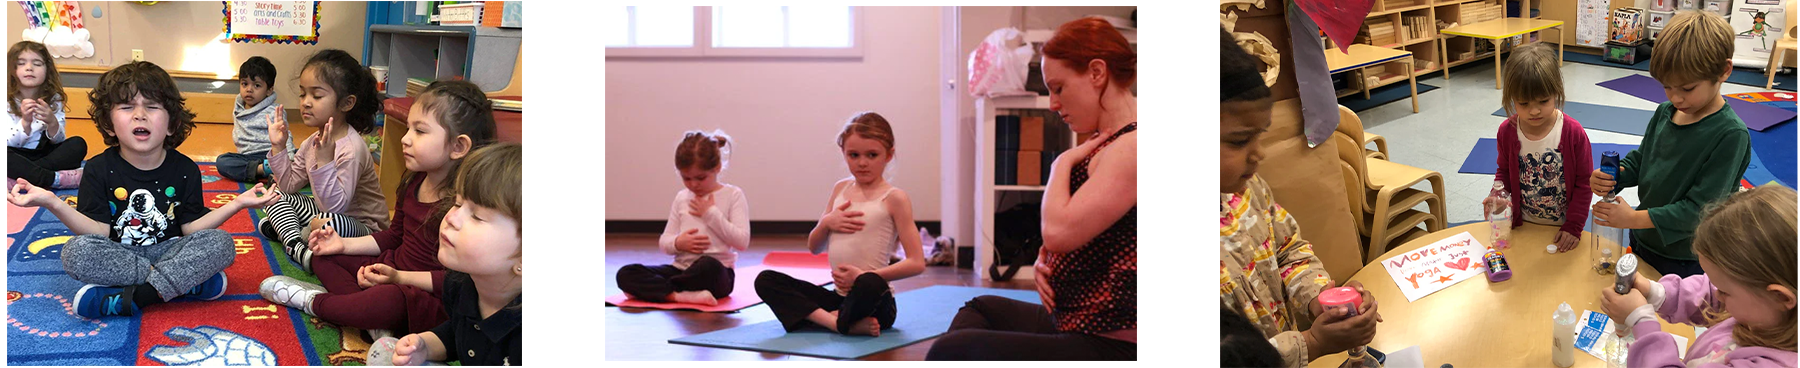 Image one - young children meditating on a rug with eyes closed. Image 2 - 2 children and an adult with hands on hearts, image 3 - children making glitter jars holding bottles and glue at a table in a school